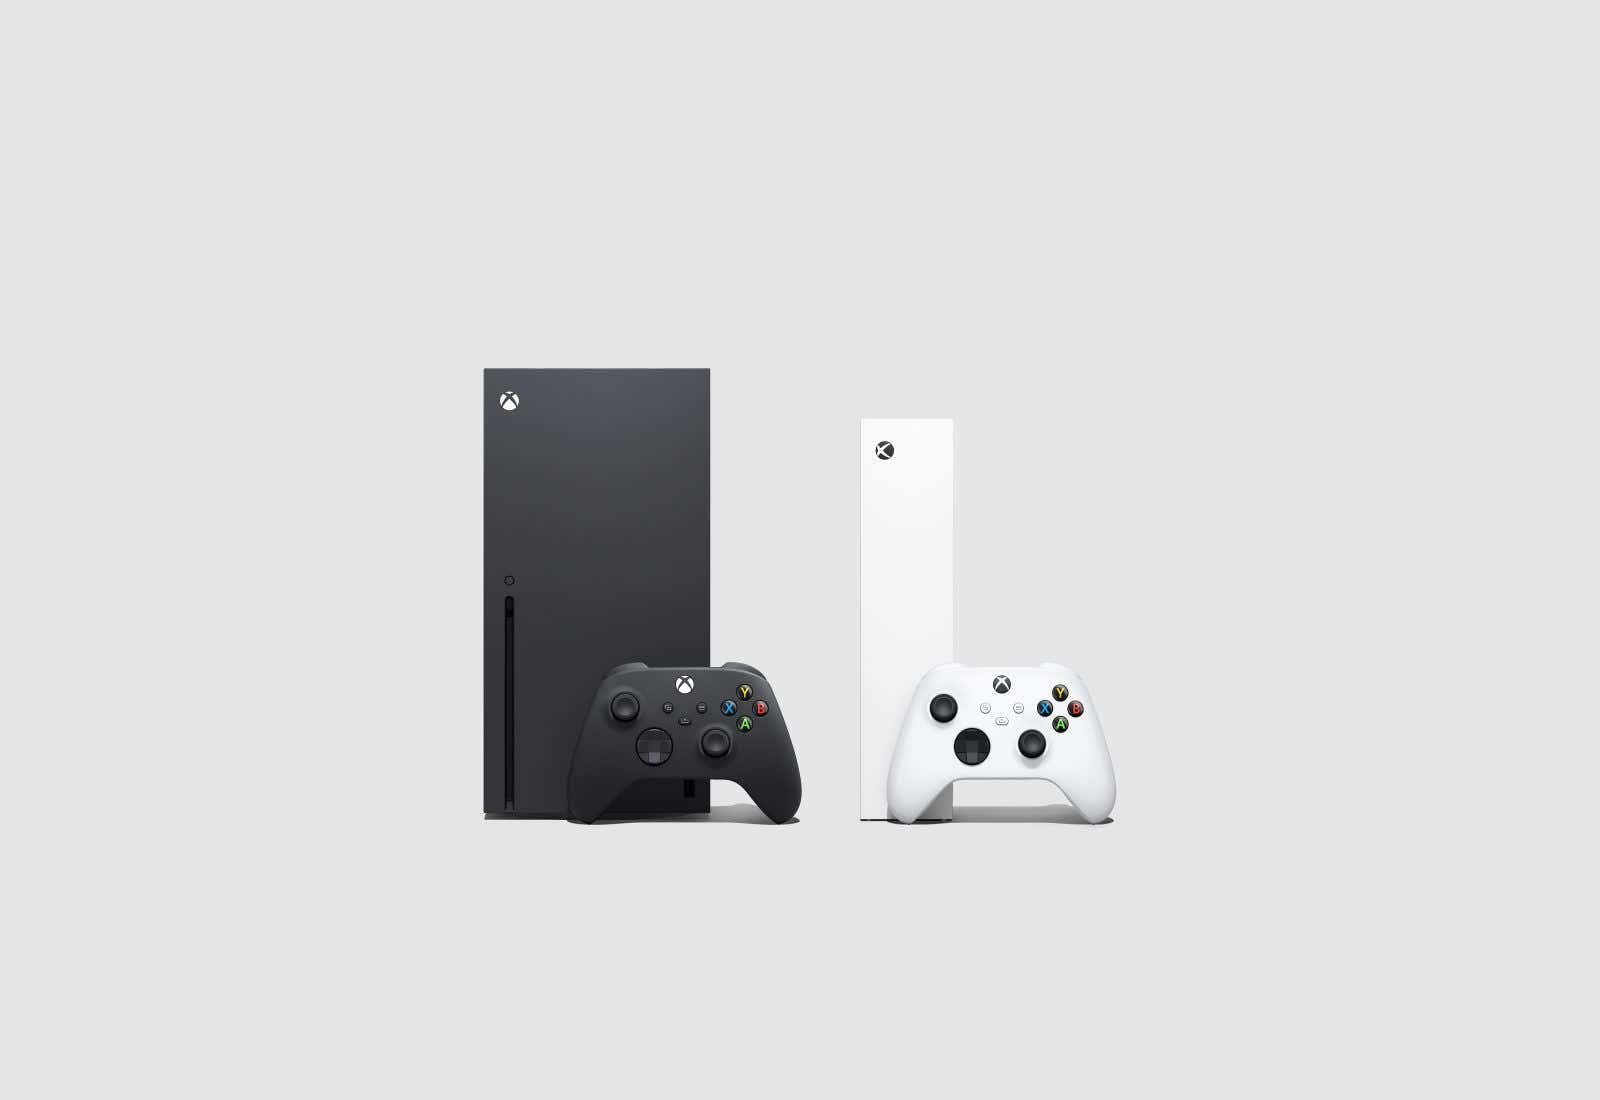 2022 Newest Xbox Series S Gaming Console System- 512GB SSD White Digital  Version W/ Minecraft Full Game | Silicone Controller Cover Skin